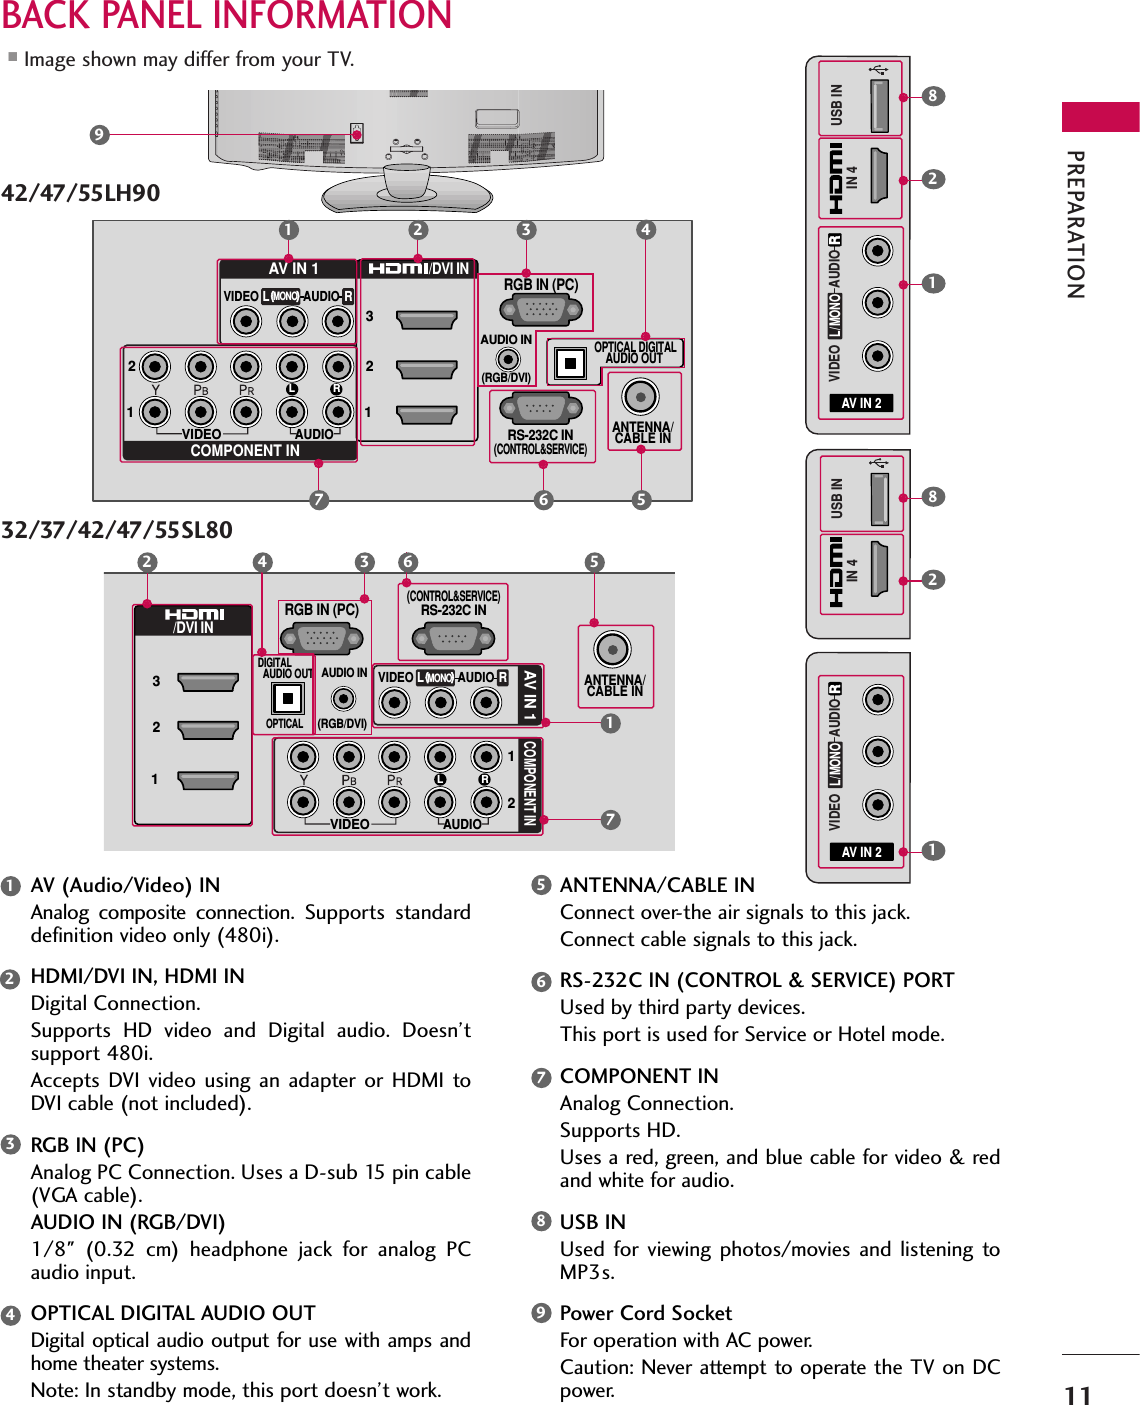 PREPARATION11BACK PANEL INFORMATION■Image shown may differ from your TV.VIDEOAUDIOL RRS-232C IN(CONTROL&amp;SERVICE)AUDIO IN(RGB/DVI)OPTICAL DIGITALAUDIO OUT ANTENNA/CABLE INRGB IN (PC)AV IN 1COMPONENT IN23121MONO(                        )AUDIOVIDEO/DVI IN(            )(            )LRR1 26 579(            )(            )(            )AV IN 2L/MONORAUDIOVIDEOUSB ININ 41824AV (Audio/Video) INAnalog  composite  connection. Supports  standarddefinition video only (480i).HDMI/DVI IN, HDMI INDigital Connection. Supports  HD  video  and  Digital  audio.  Doesn’tsupport 480i. Accepts  DVI  video  using  an  adapter  or  HDMI  toDVI cable (not included).RGB IN (PC)Analog PC Connection. Uses a D-sub 15 pin cable(VGA cable).AUDIO IN (RGB/DVI)1/8&quot;  (0.32  cm)  headphone  jack  for  analog  PCaudio input.OPTICAL DIGITAL AUDIO OUTDigital  optical audio output for  use with  amps andhome theater systems. Note: In standby mode, this port doesn’t work.ANTENNA/CABLE INConnect over-the air signals to this jack.Connect cable signals to this jack.RS-232C IN (CONTROL &amp; SERVICE) PORTUsed by third party devices.This port is used for Service or Hotel mode.COMPONENT INAnalog Connection. Supports HD. Uses a red, green, and blue cable for video &amp; redand white for audio.USB INUsed  for  viewing photos/movies  and  listening toMP3s.Power Cord SocketFor operation with AC power. Caution: Never attempt to operate the TV on DCpower.123489765(            )USB ININ 4R(            )AV IN 2L/MONORAUDIOVIDEO3VIDEOAUDIOL R(CONTROL&amp;SERVICE)RS-232C INAUDIO IN(RGB/DVI)DIGITAL  AUDIO OUT OPTICALANTENNA/CABLE INRGB IN (PC)COMPONENT IN23112MONO(                        )AUDIOVIDEO/DVI INLRRAV IN 12 4 3 6 51718242/47/55LH9032/37/42/47/55SL80